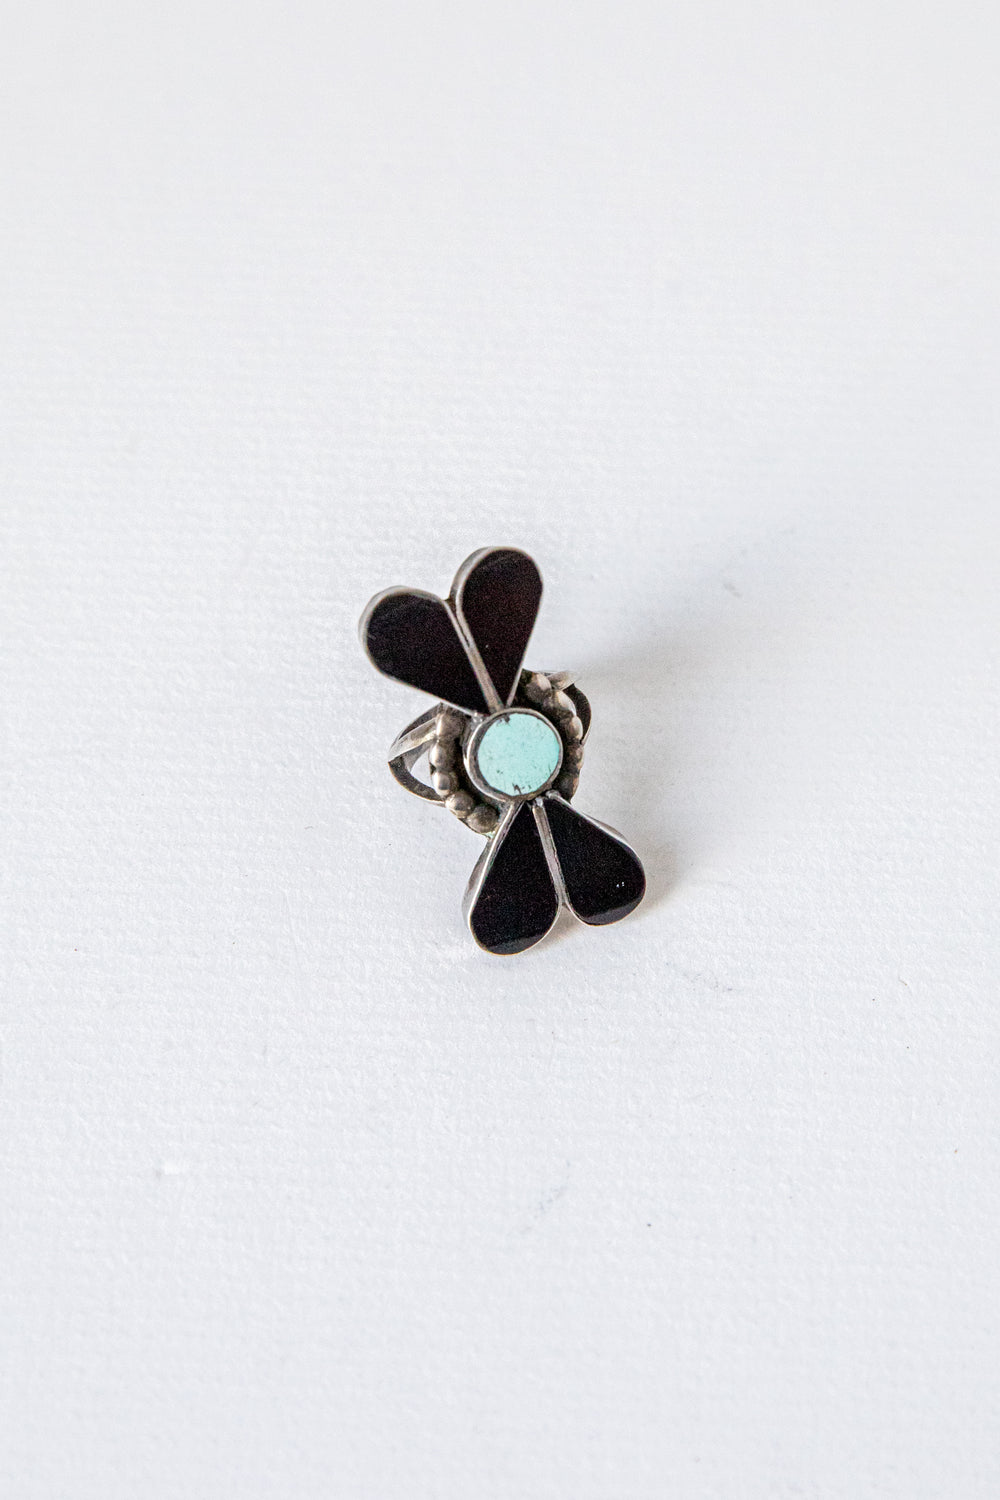 Silver + Turquoise Bow Tie Ring